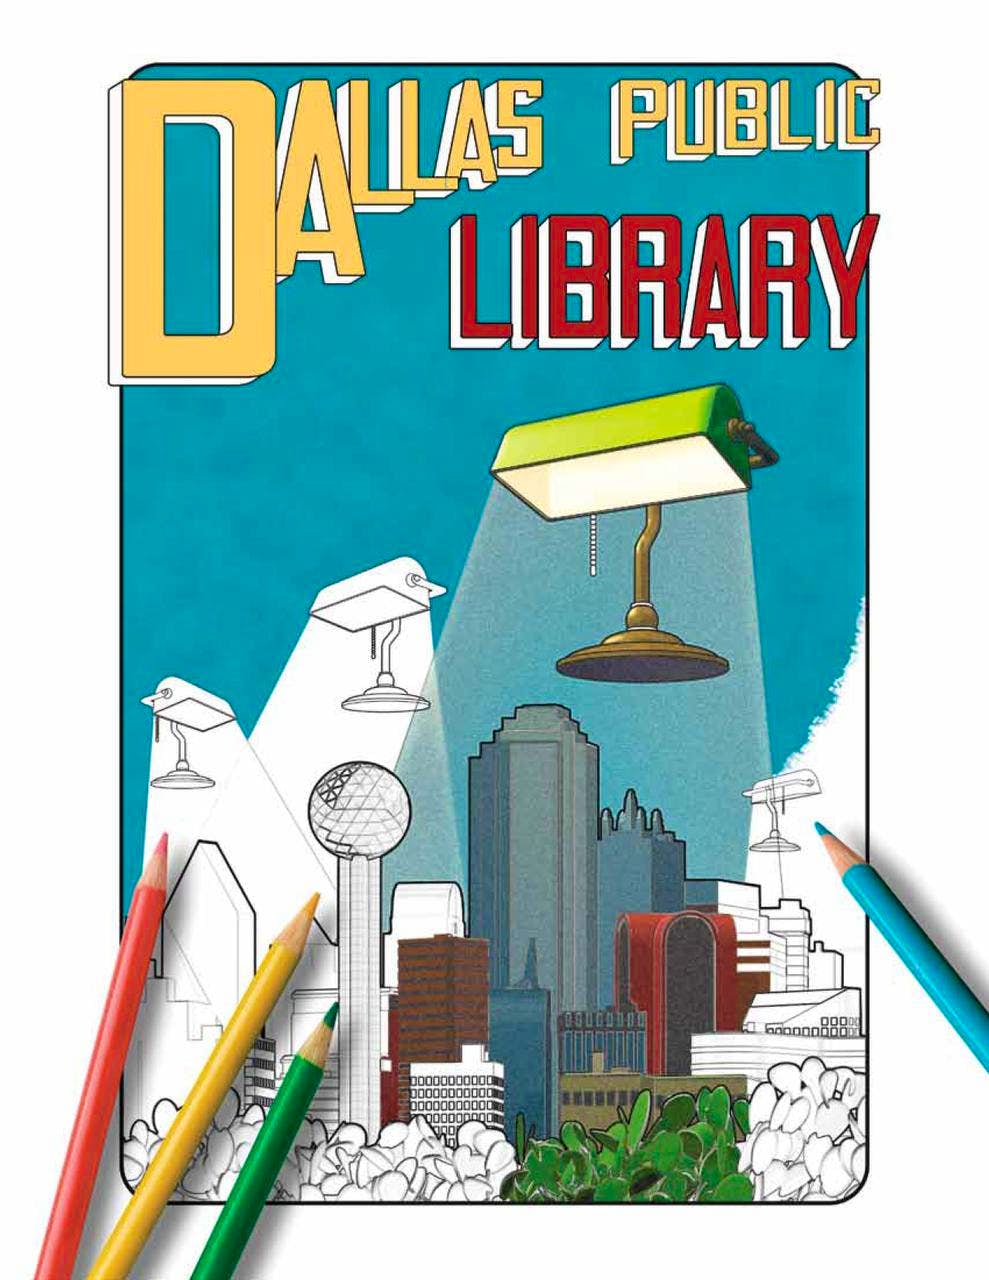 Editorial: Color us enthusiastic about Dallas library’s new coloring